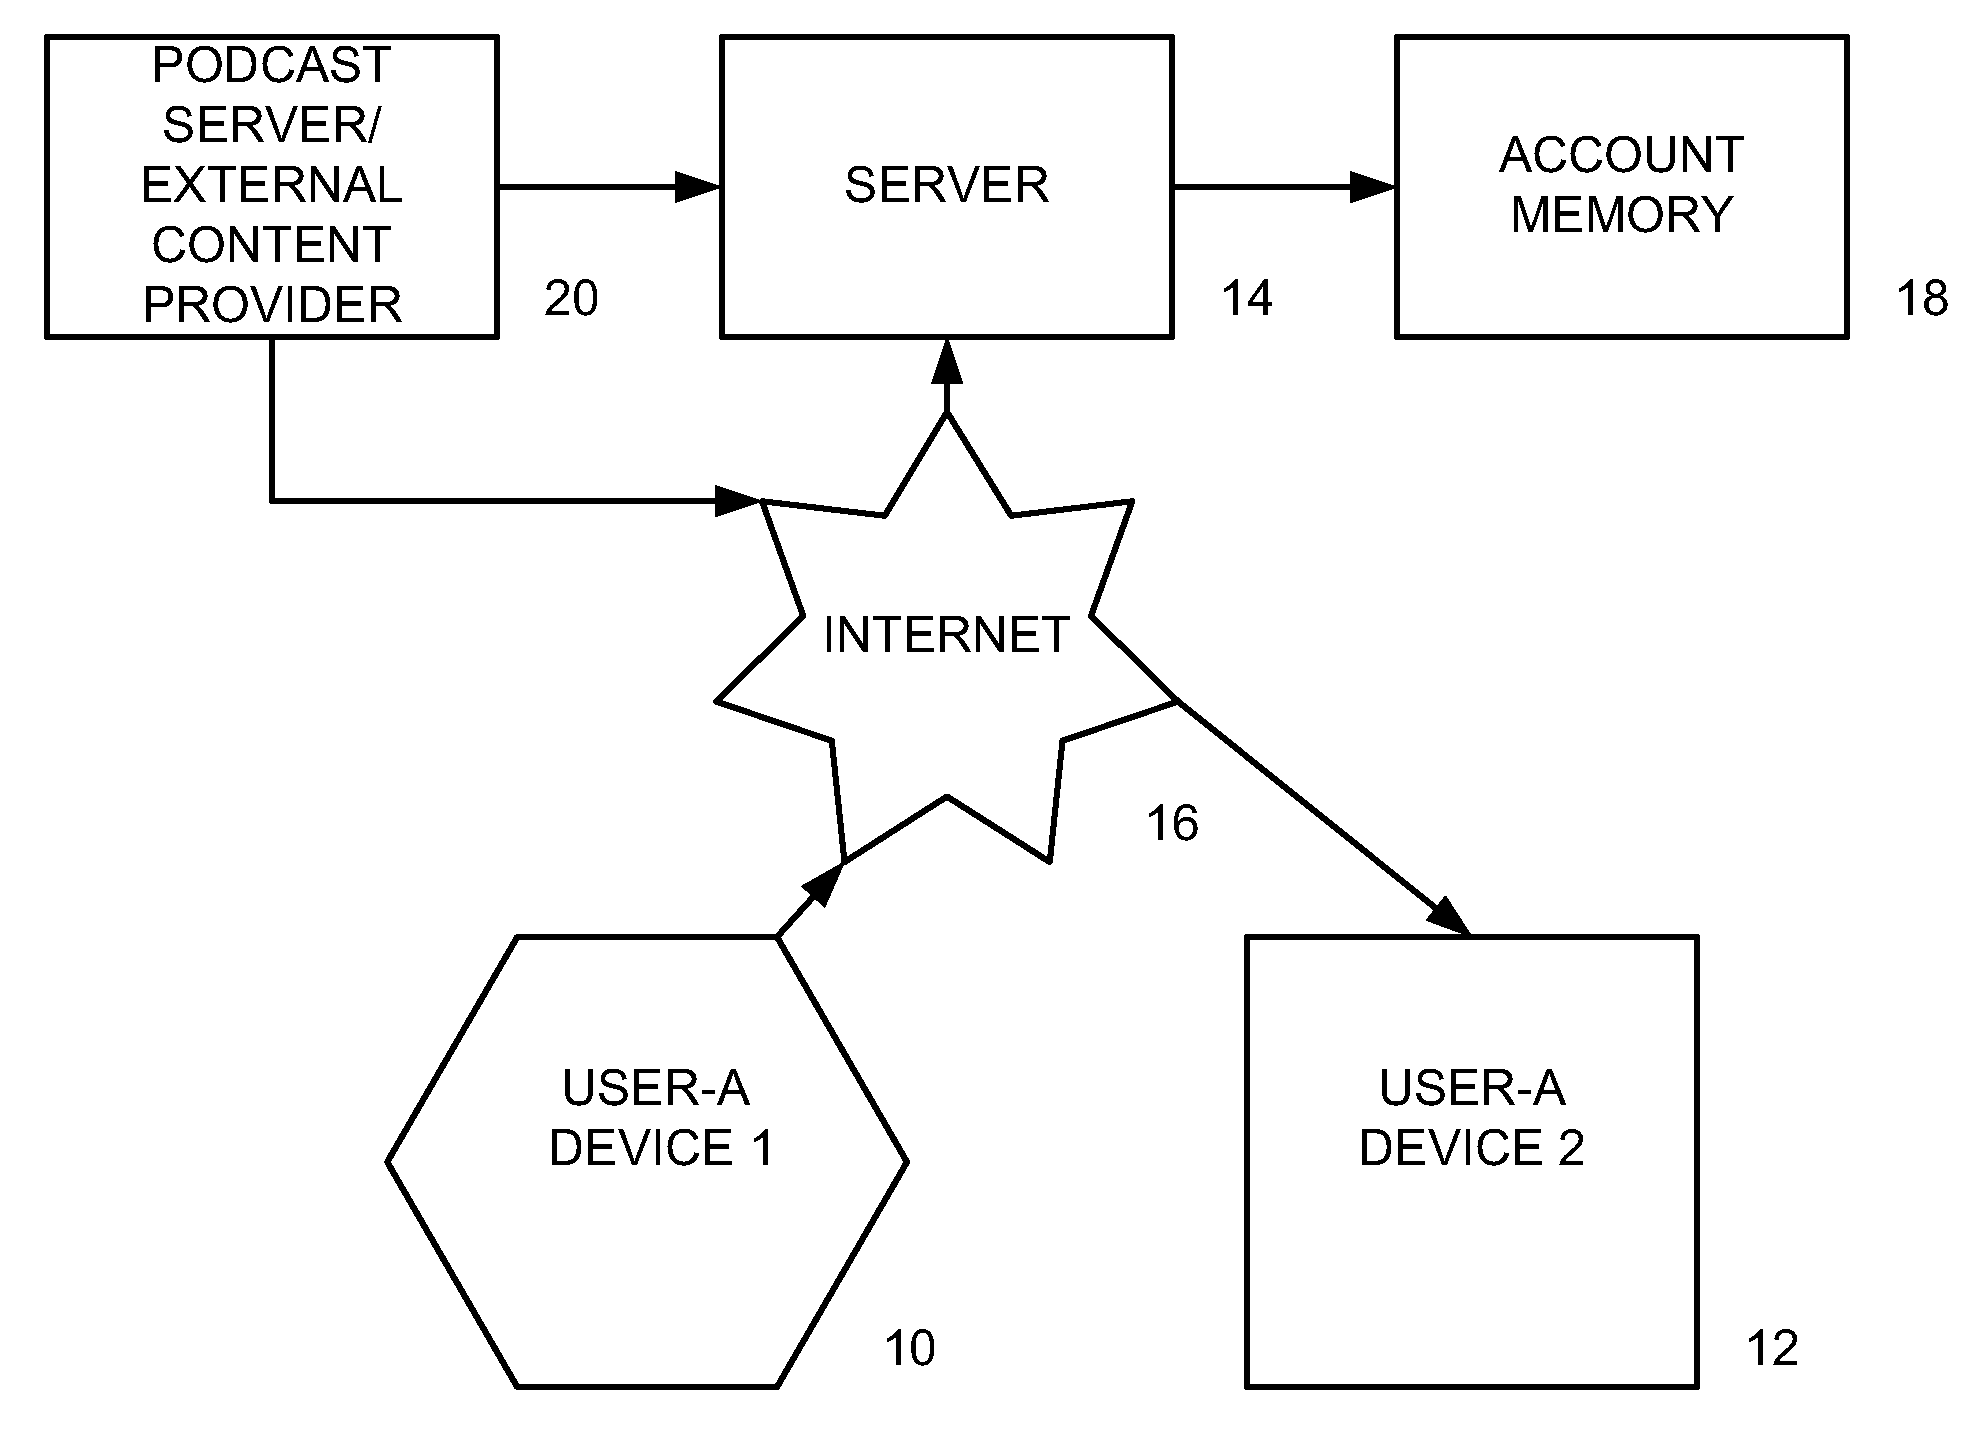 Apparatus and methods for playing digital content and displaying same